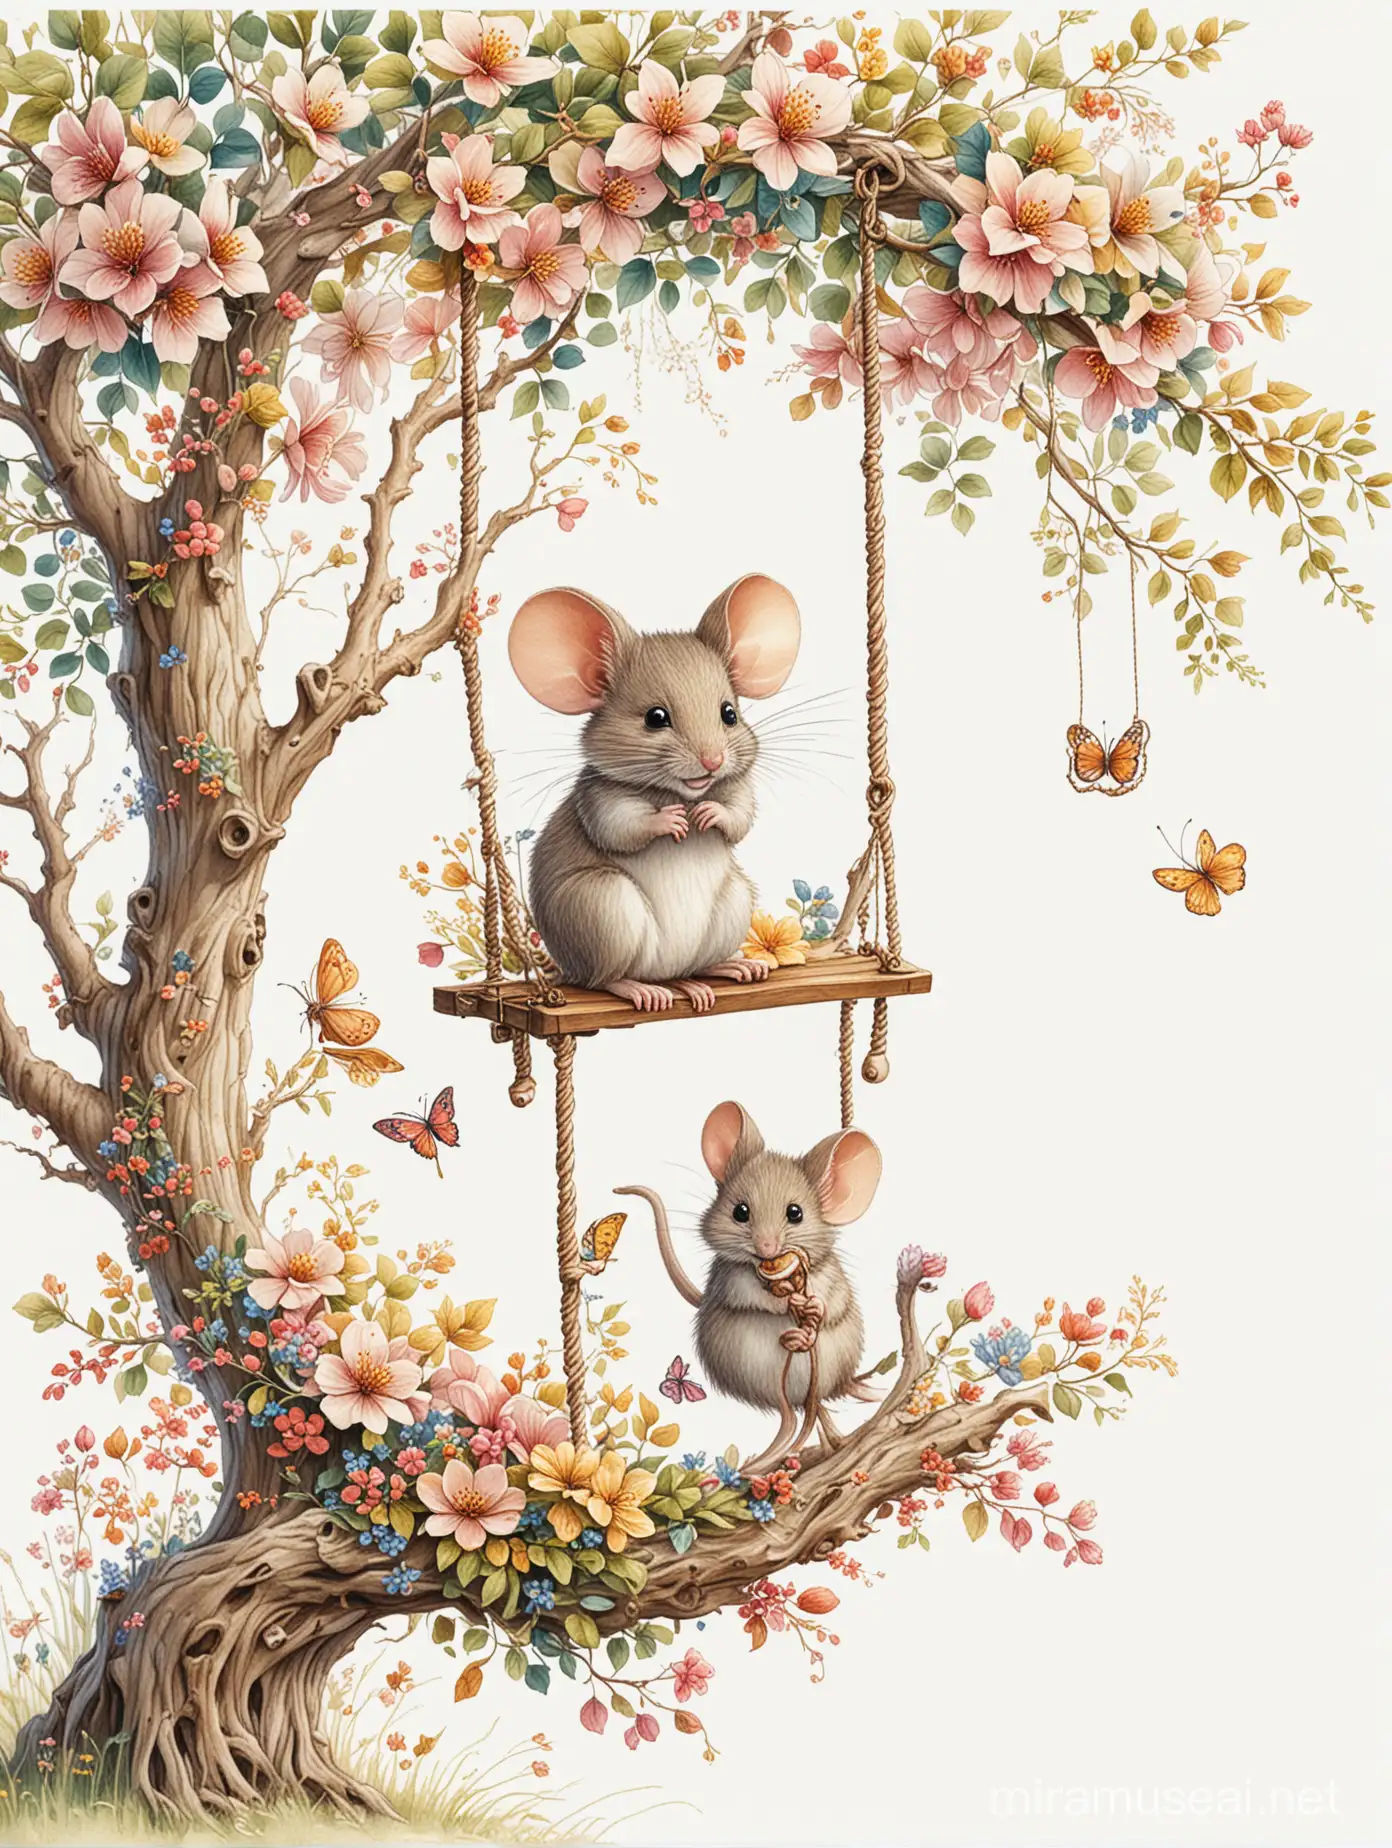 Whimsical Mouse Swinging on Flowery Tree Swing FairyTale Graphic